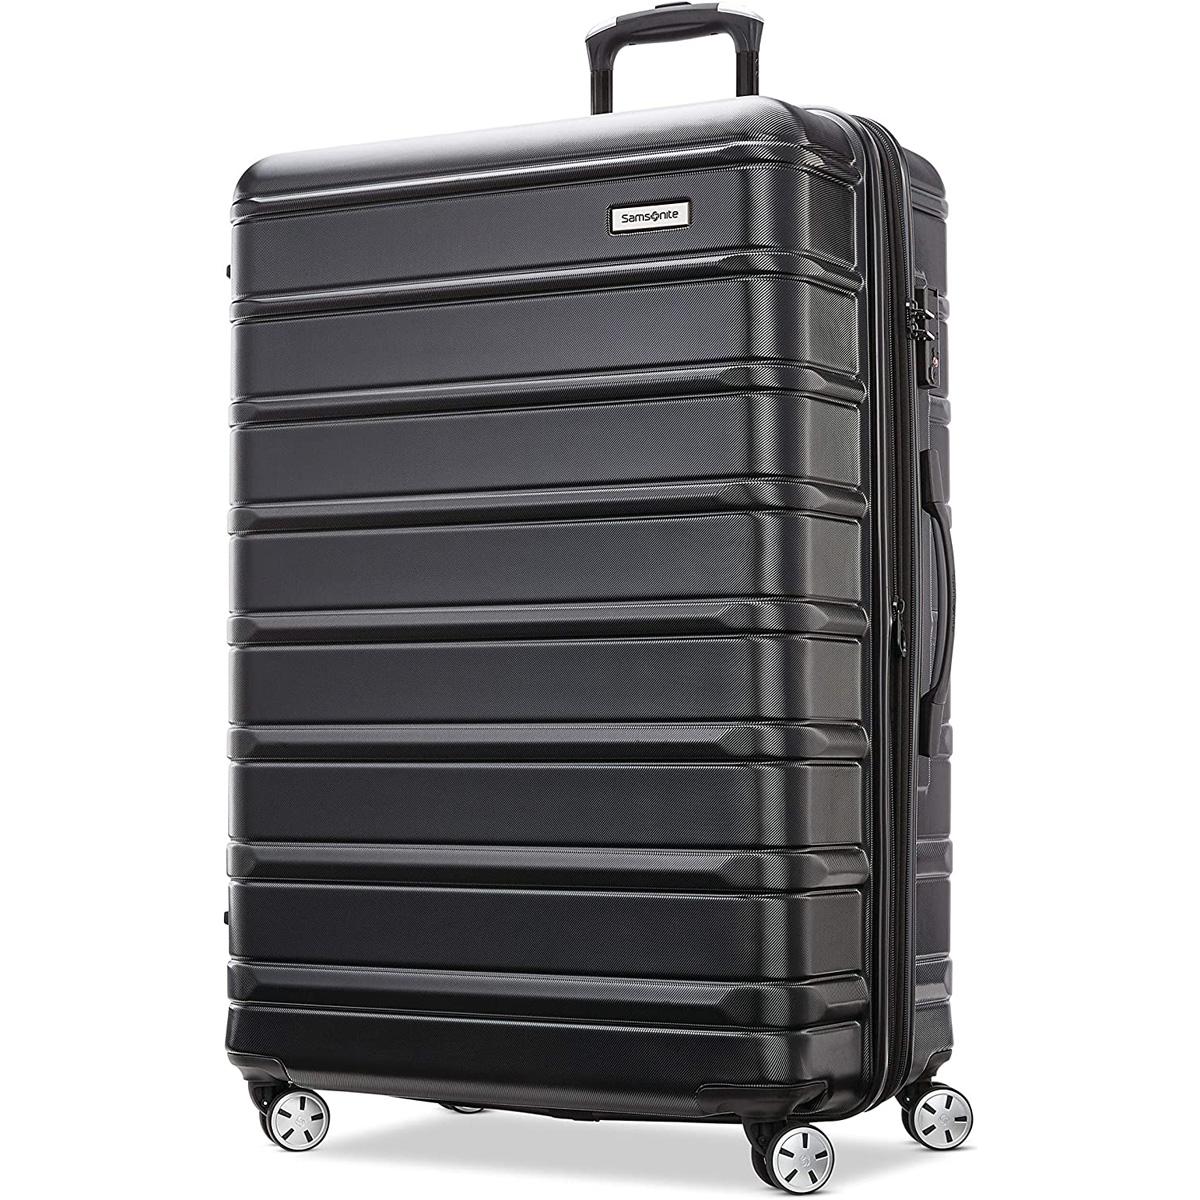 28in Samsonite Omni 2 Hardside Expandable Luggage for $121.10 Shipped